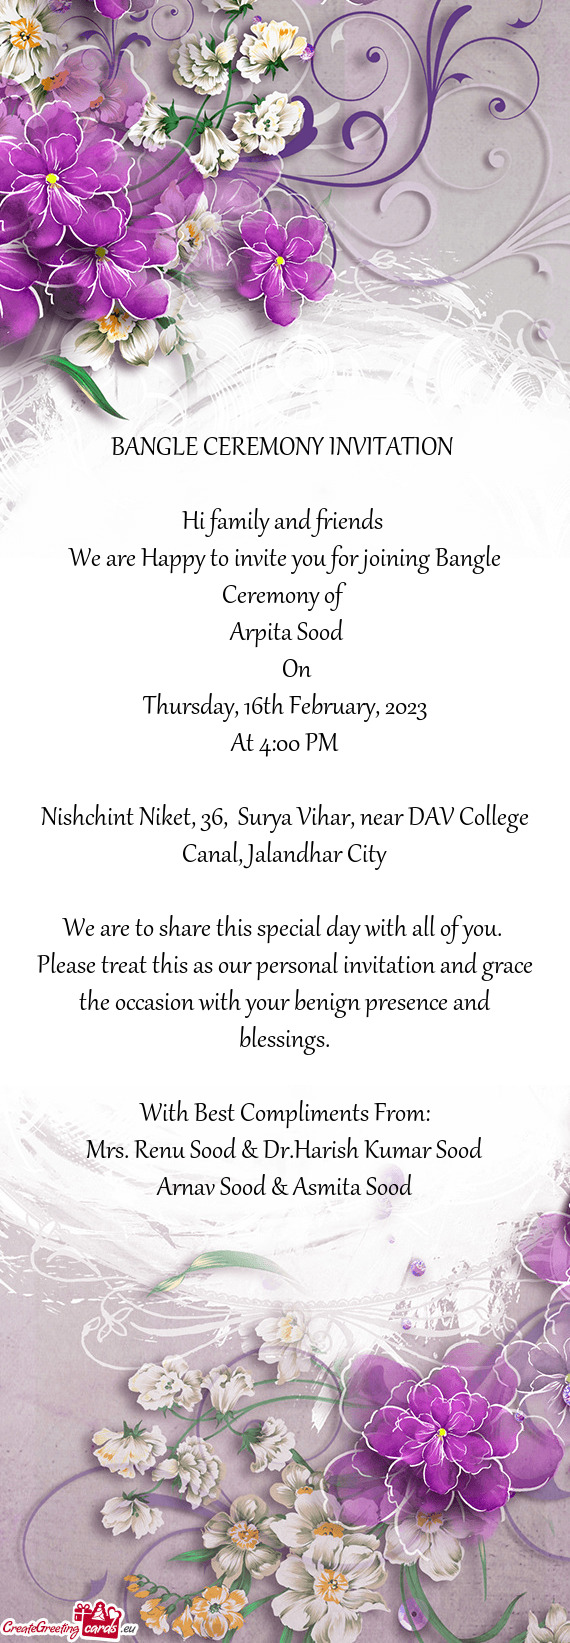 We are Happy to invite you for joining Bangle Ceremony of